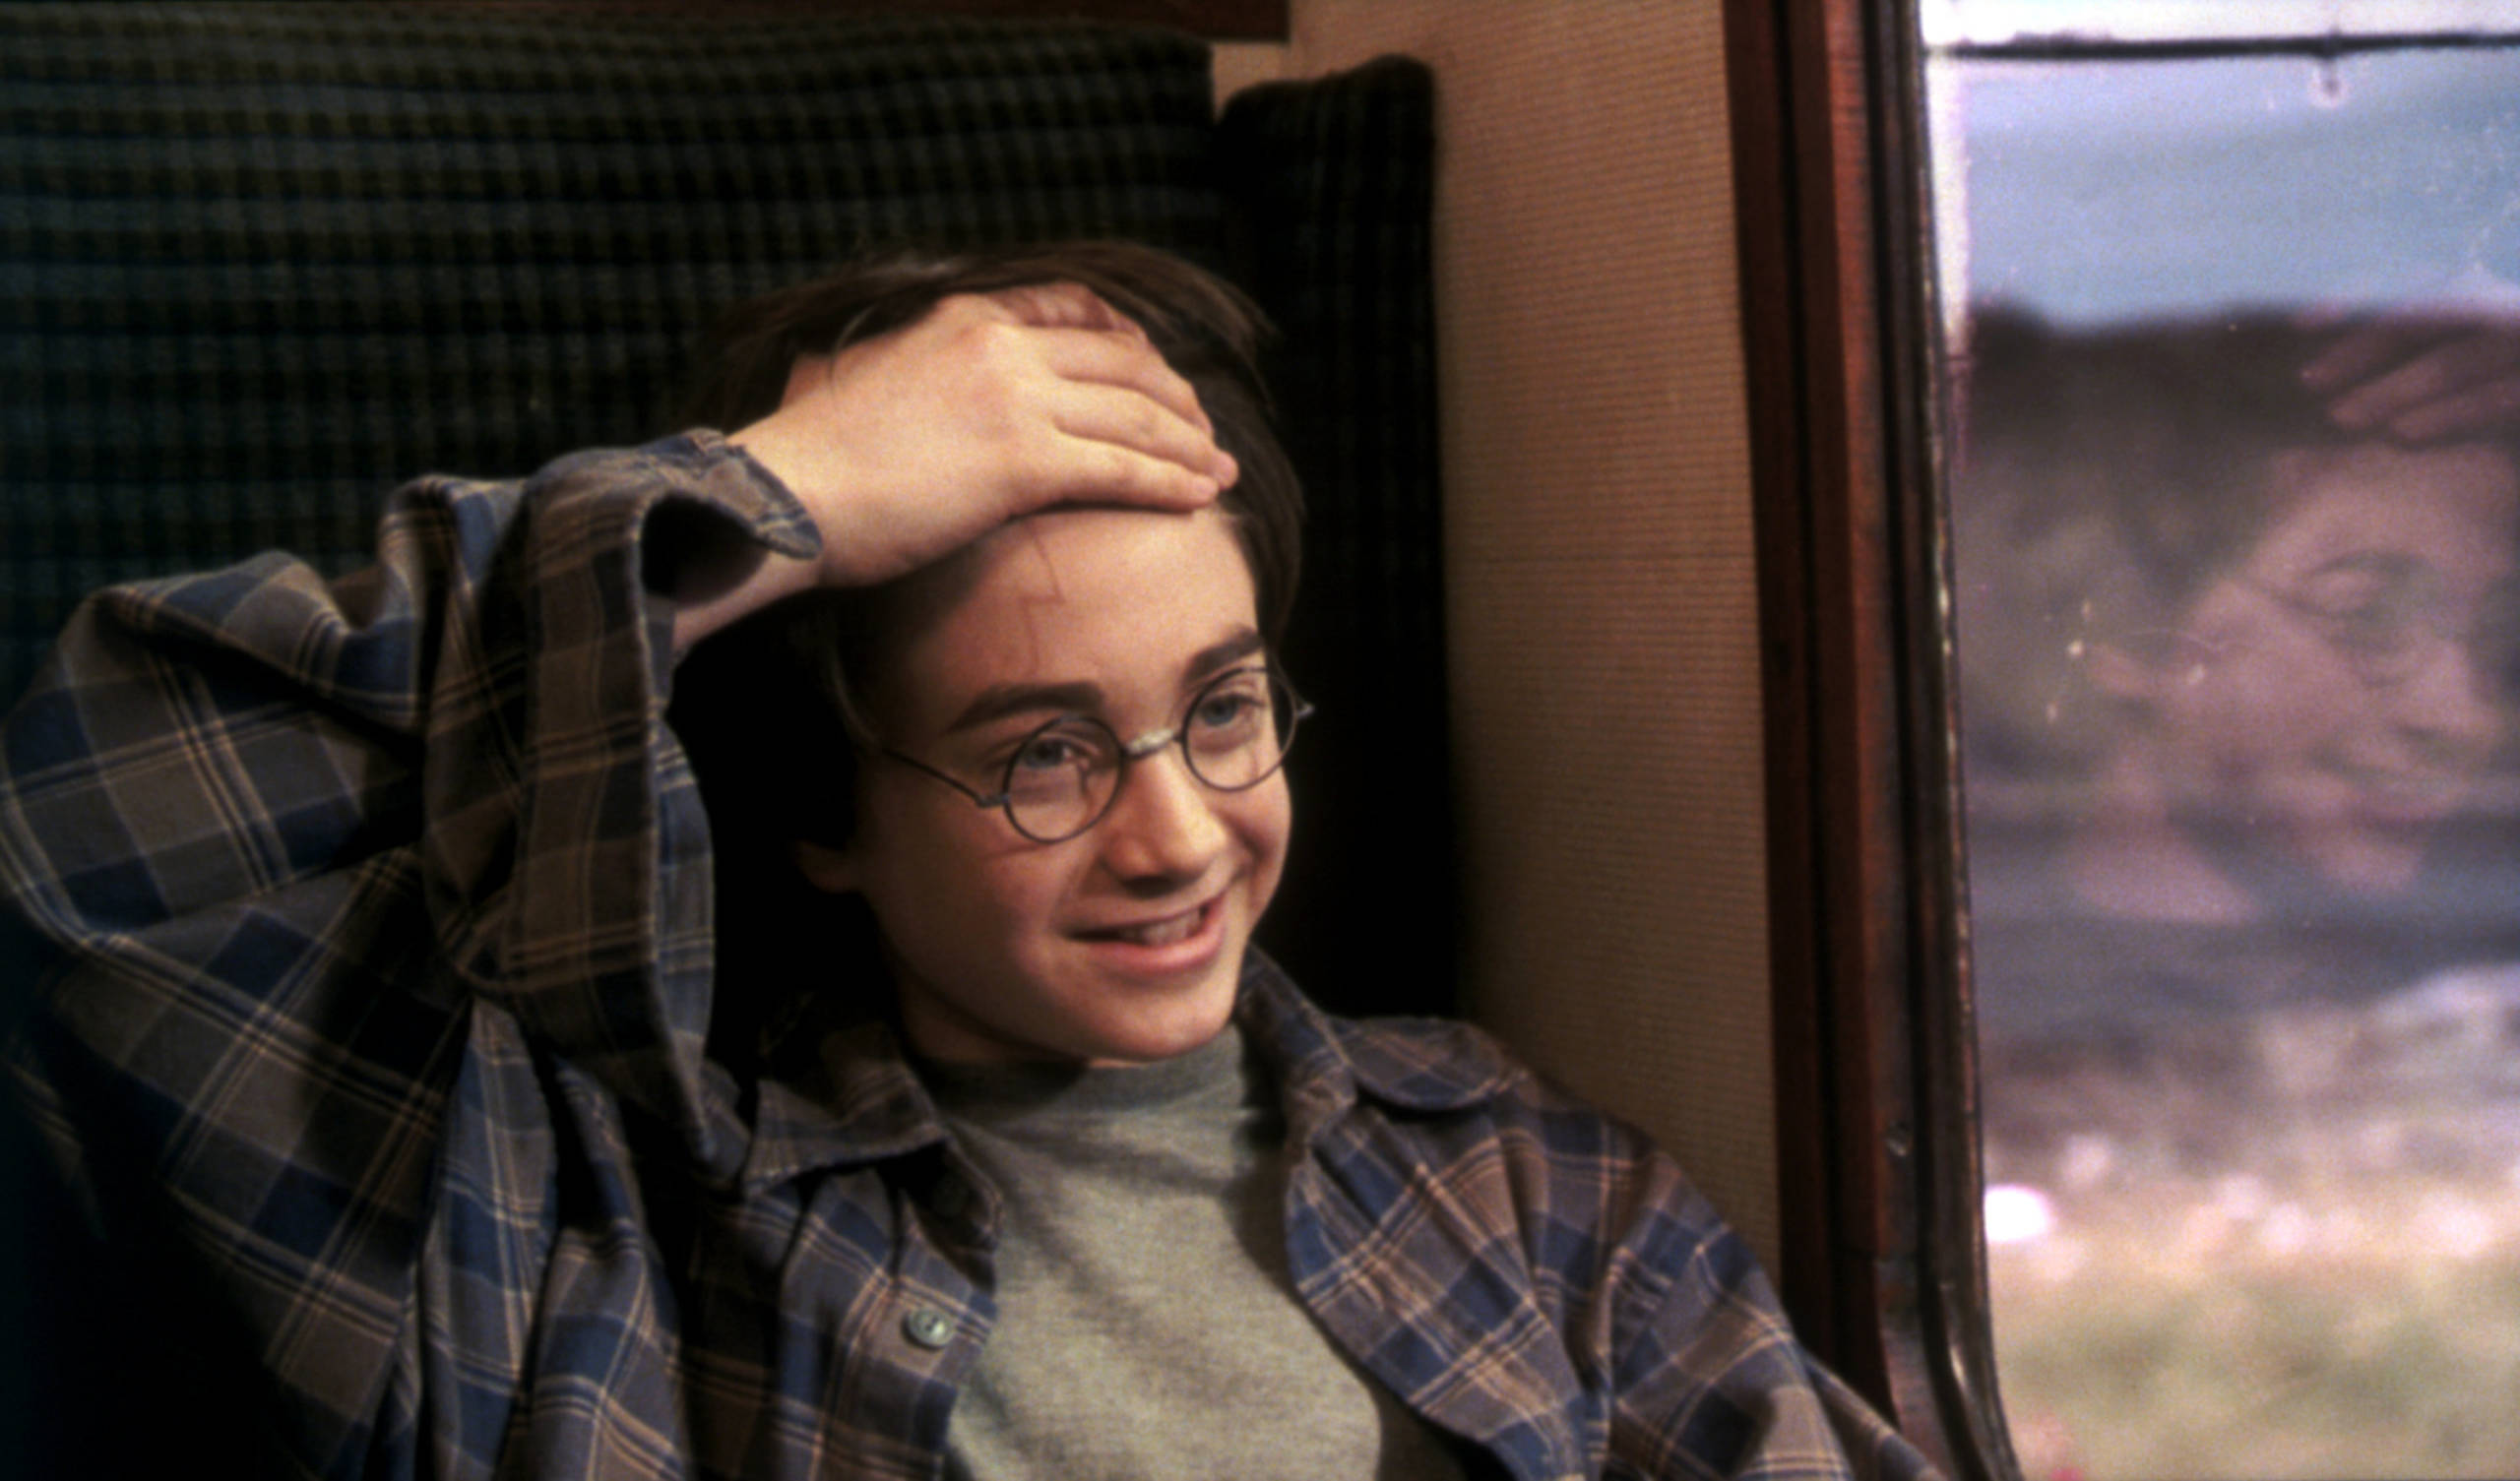 Harry Potter, sitting in a train car on the Hogwarts Express, lifts up his hair to reveal his lightning scar in Harry Potter and the Sorcerer’s Stone